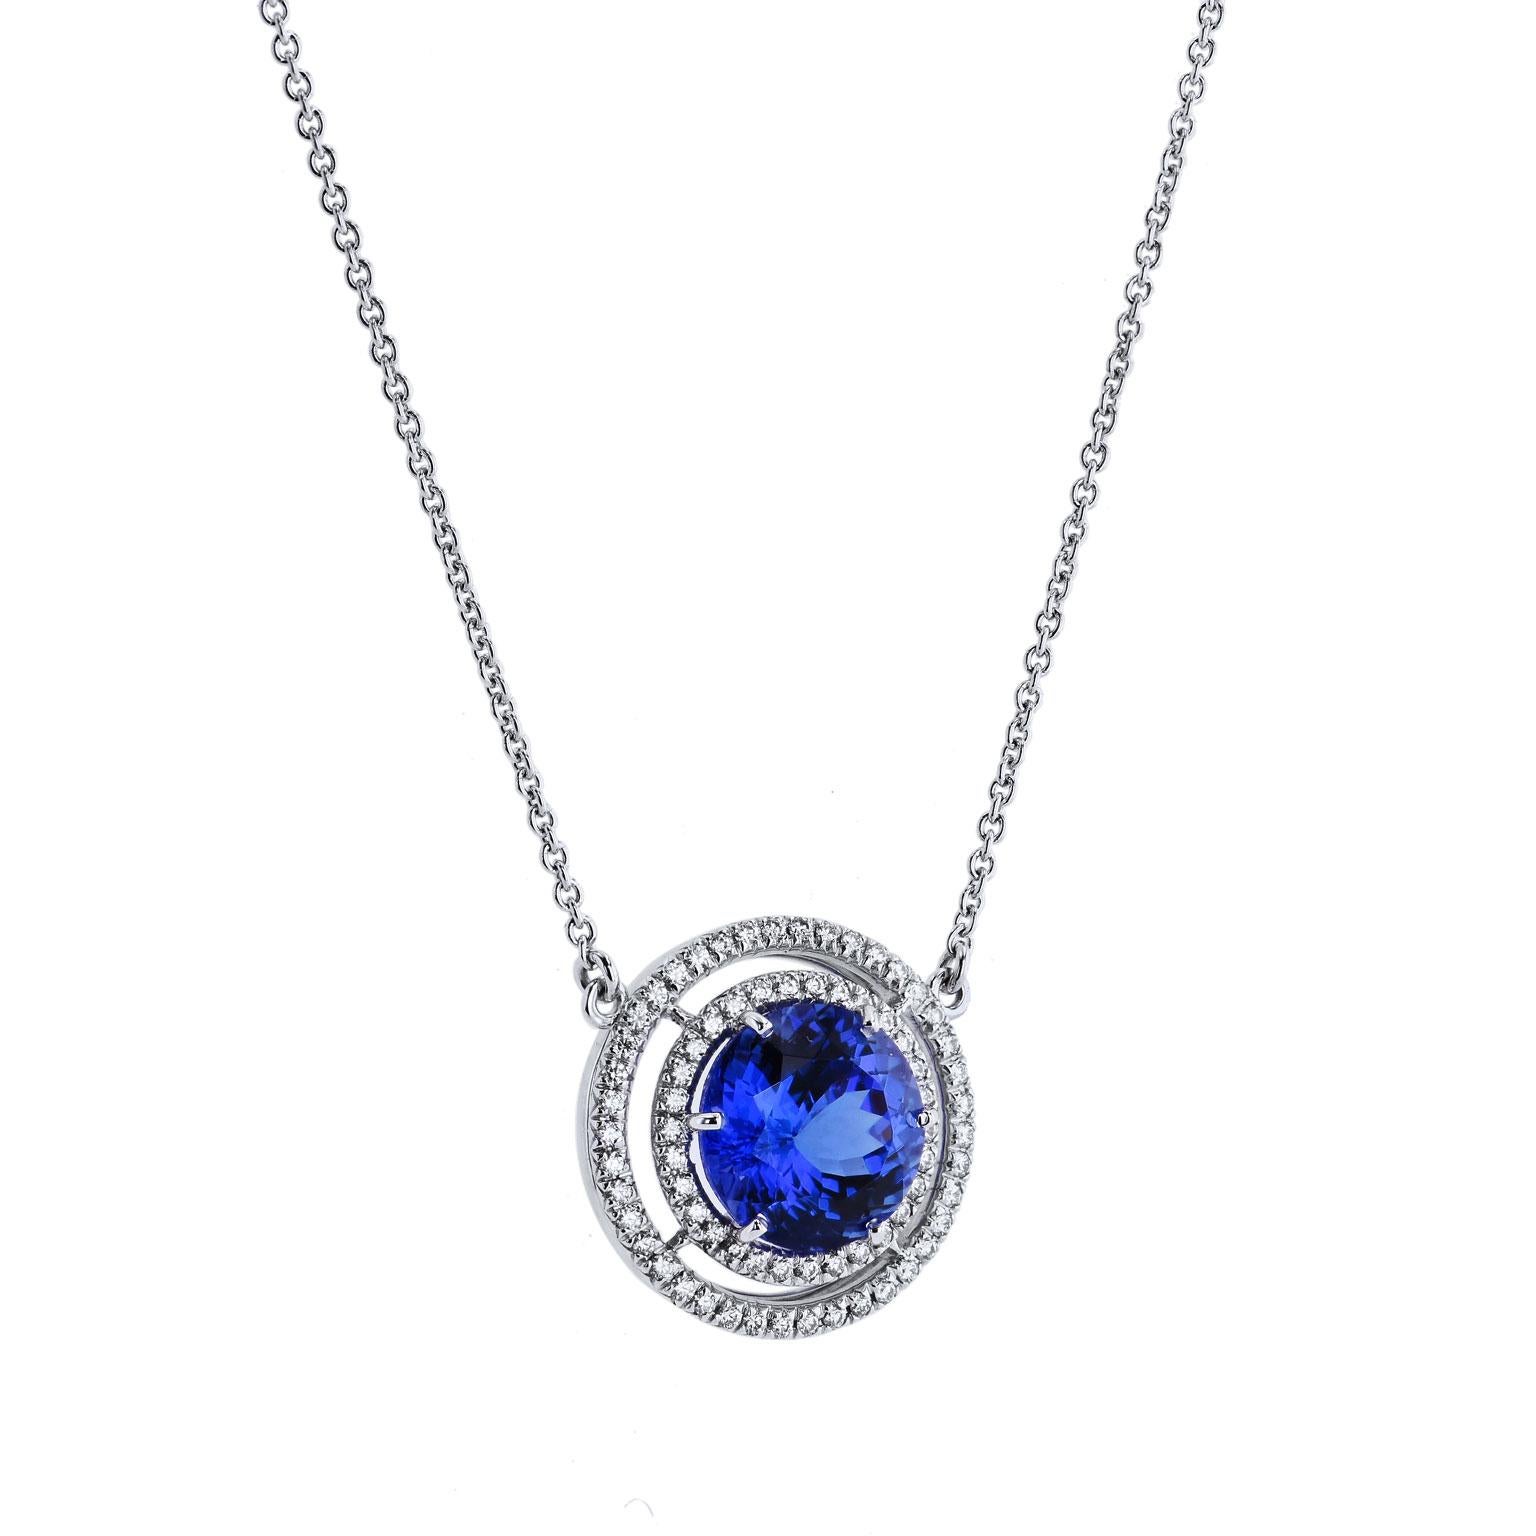 H&H 4.39 Carat Tanzanite Pave Diamond Double Halo Pendant Necklace

This is a one of a kind, handmade piece by H&H Jewels.  
It features a 14.39 carat Tanzanite and a double halo made up of 0.32ct I/J VS1 Pave Diamonds.

It is a truly stunning